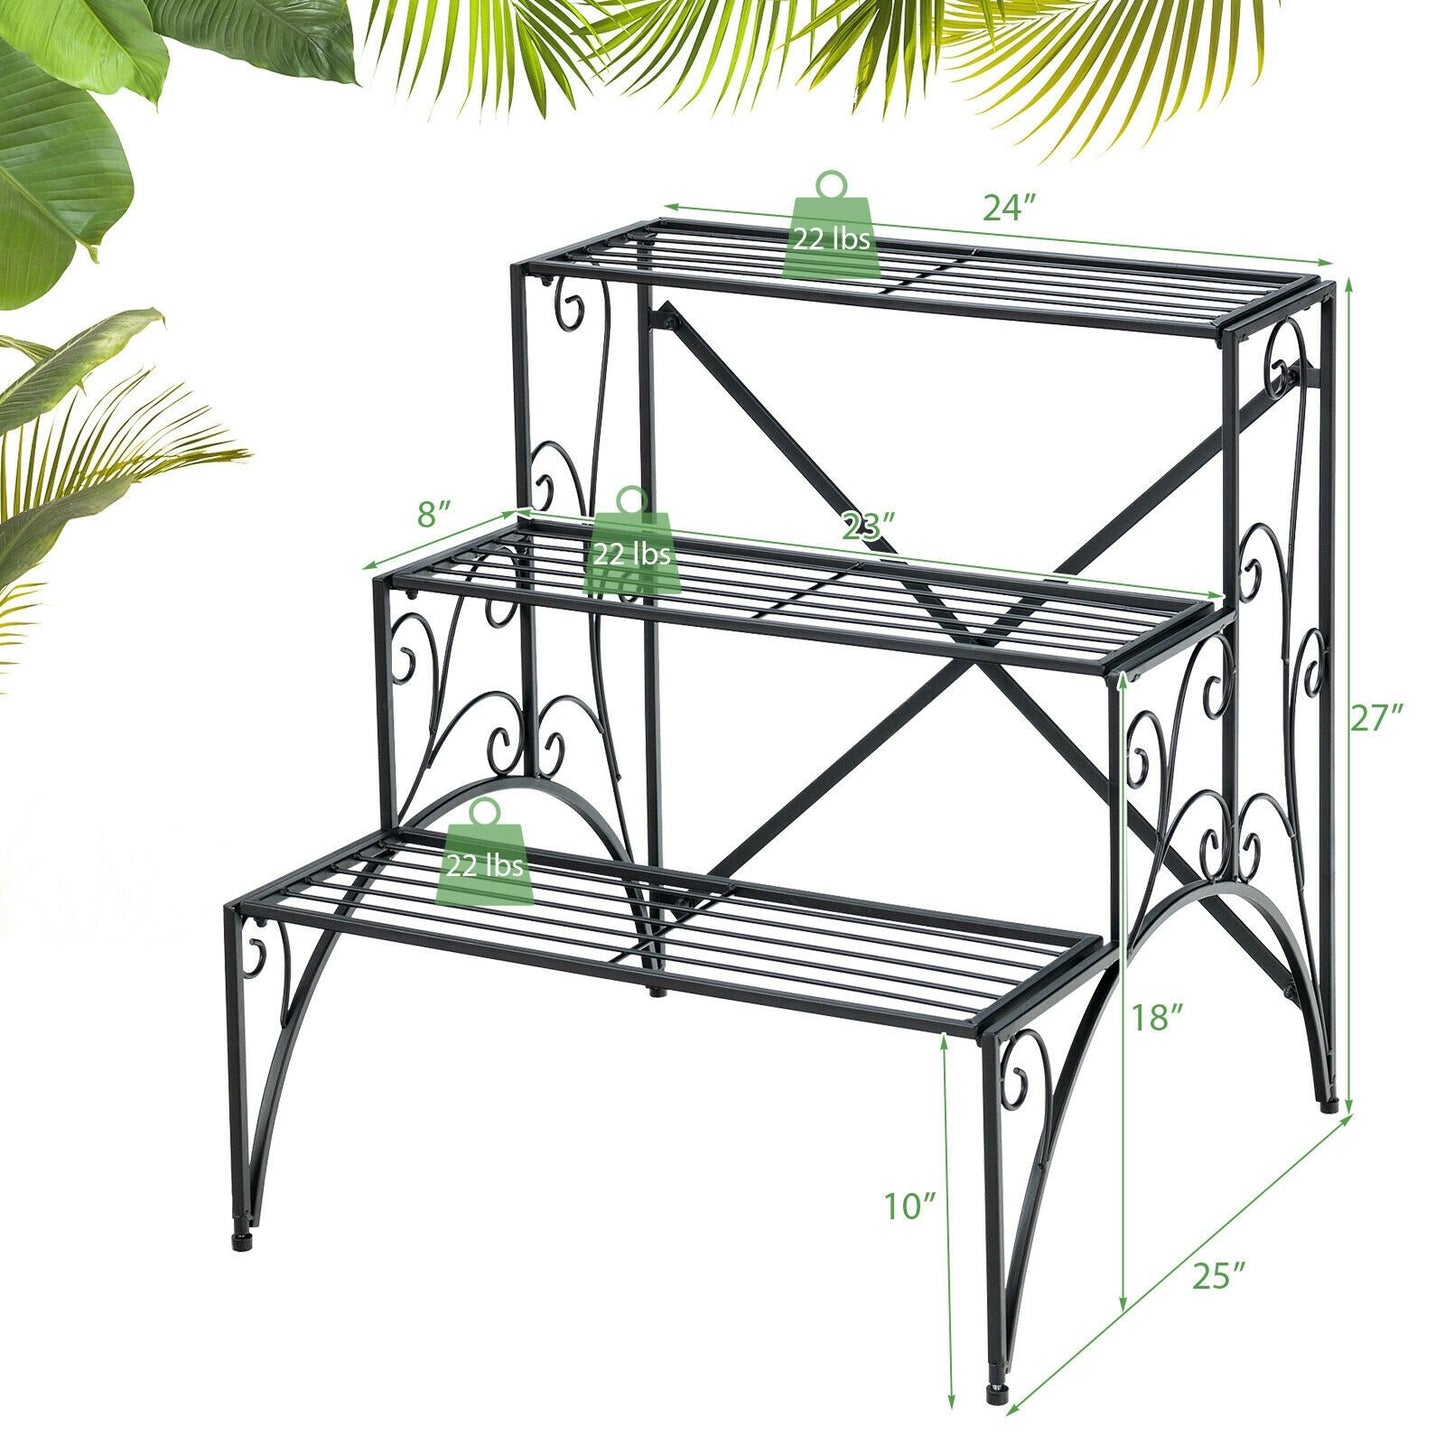 3-Tier Metal Plant Stand with Widened Grid Shelf for Porch Garden, Black